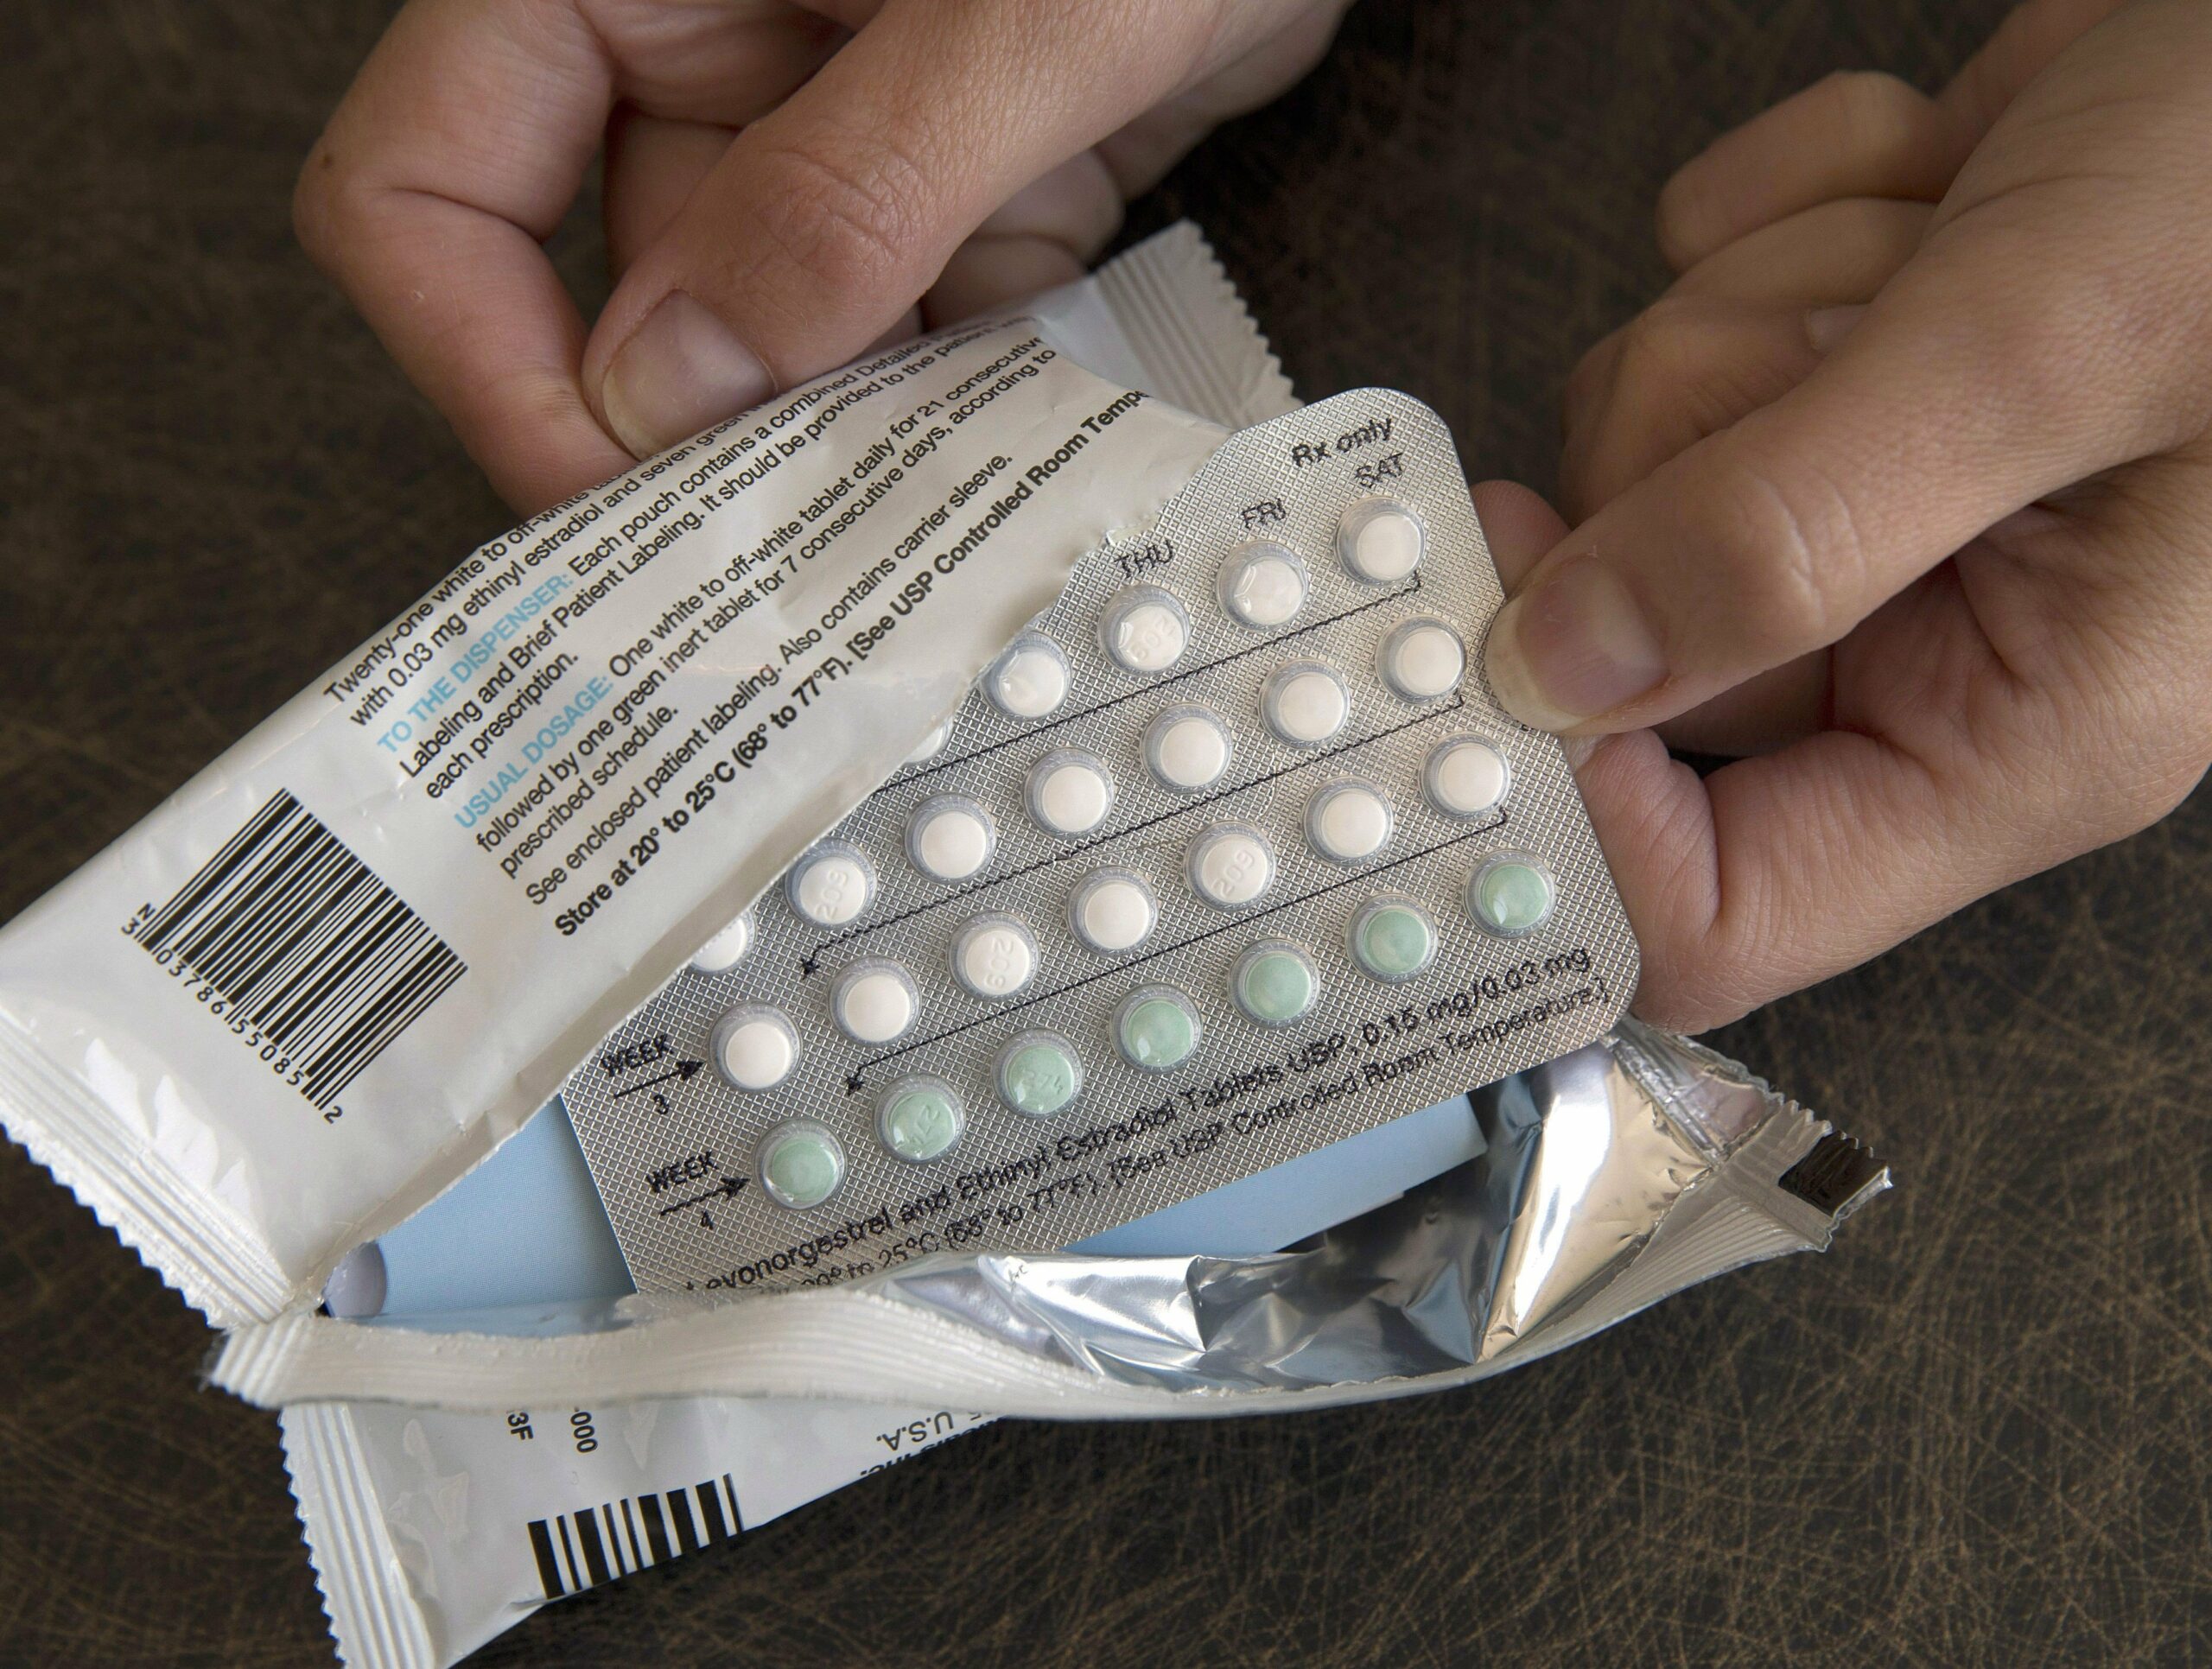 Ontario NDP promises to cover prescription birth control under OHIP